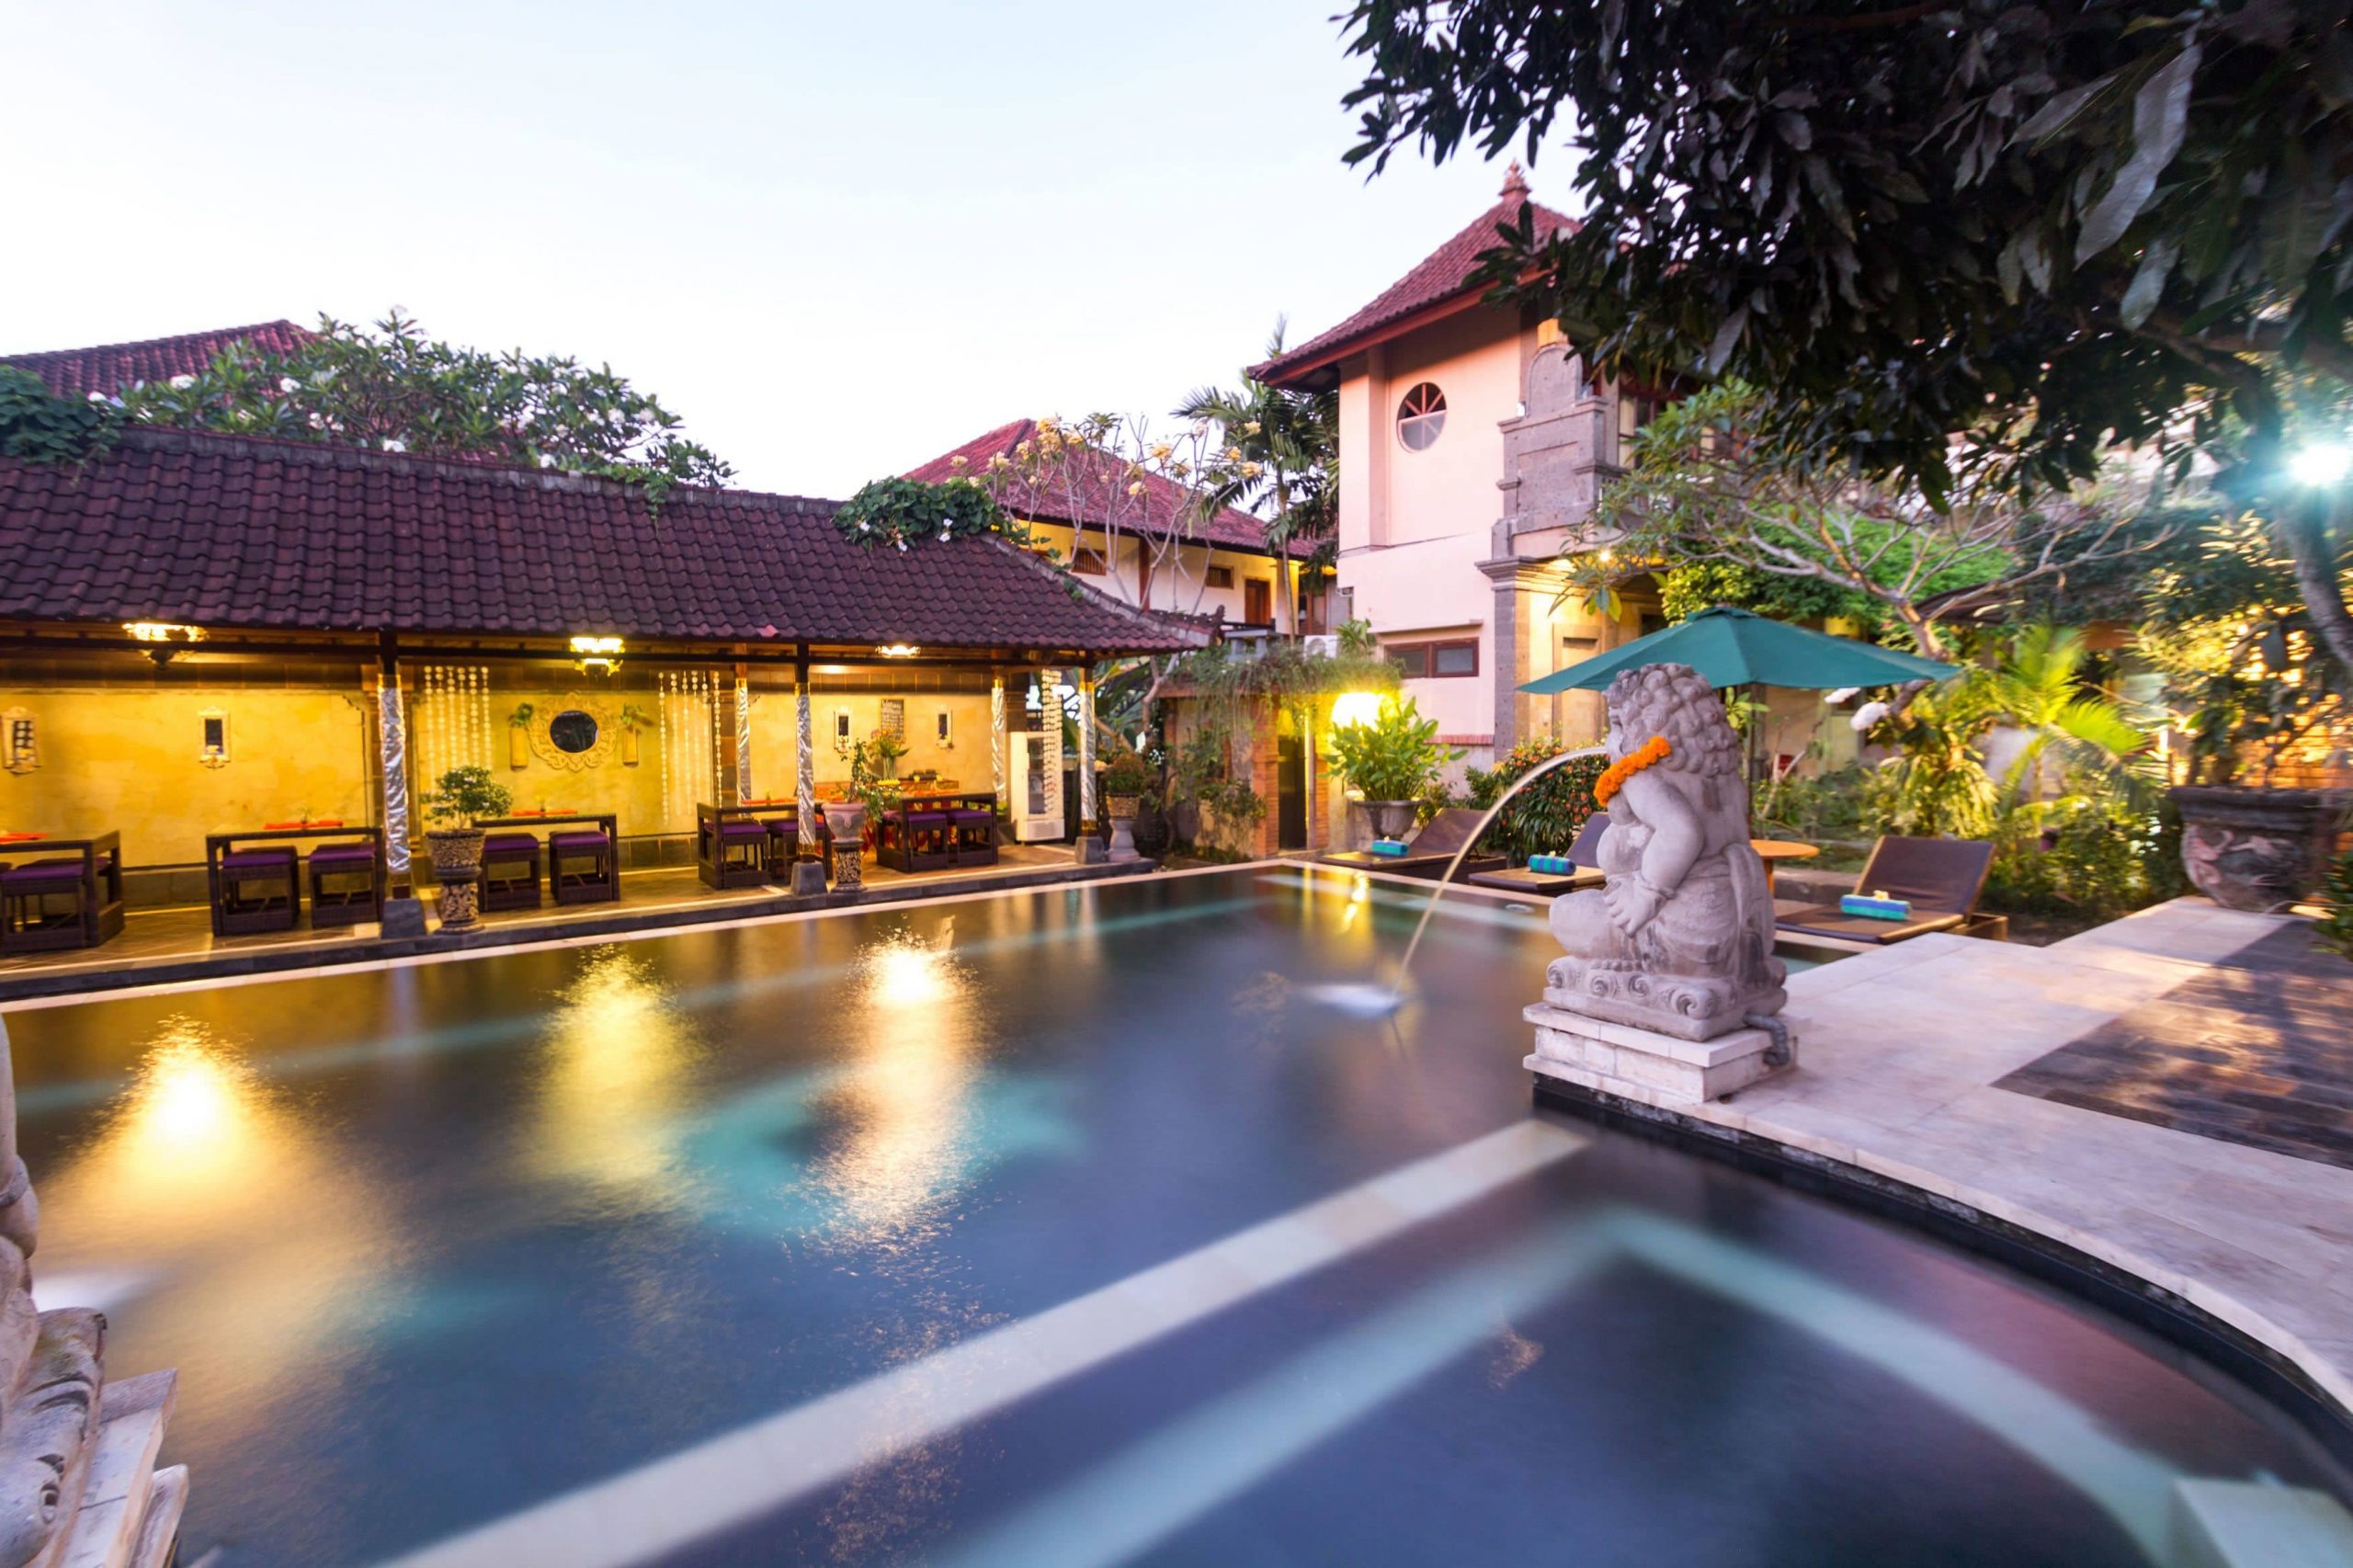 The beautiful outdoor pool area at the Ubud Aura Retreat Center for yoga and tropical peace.